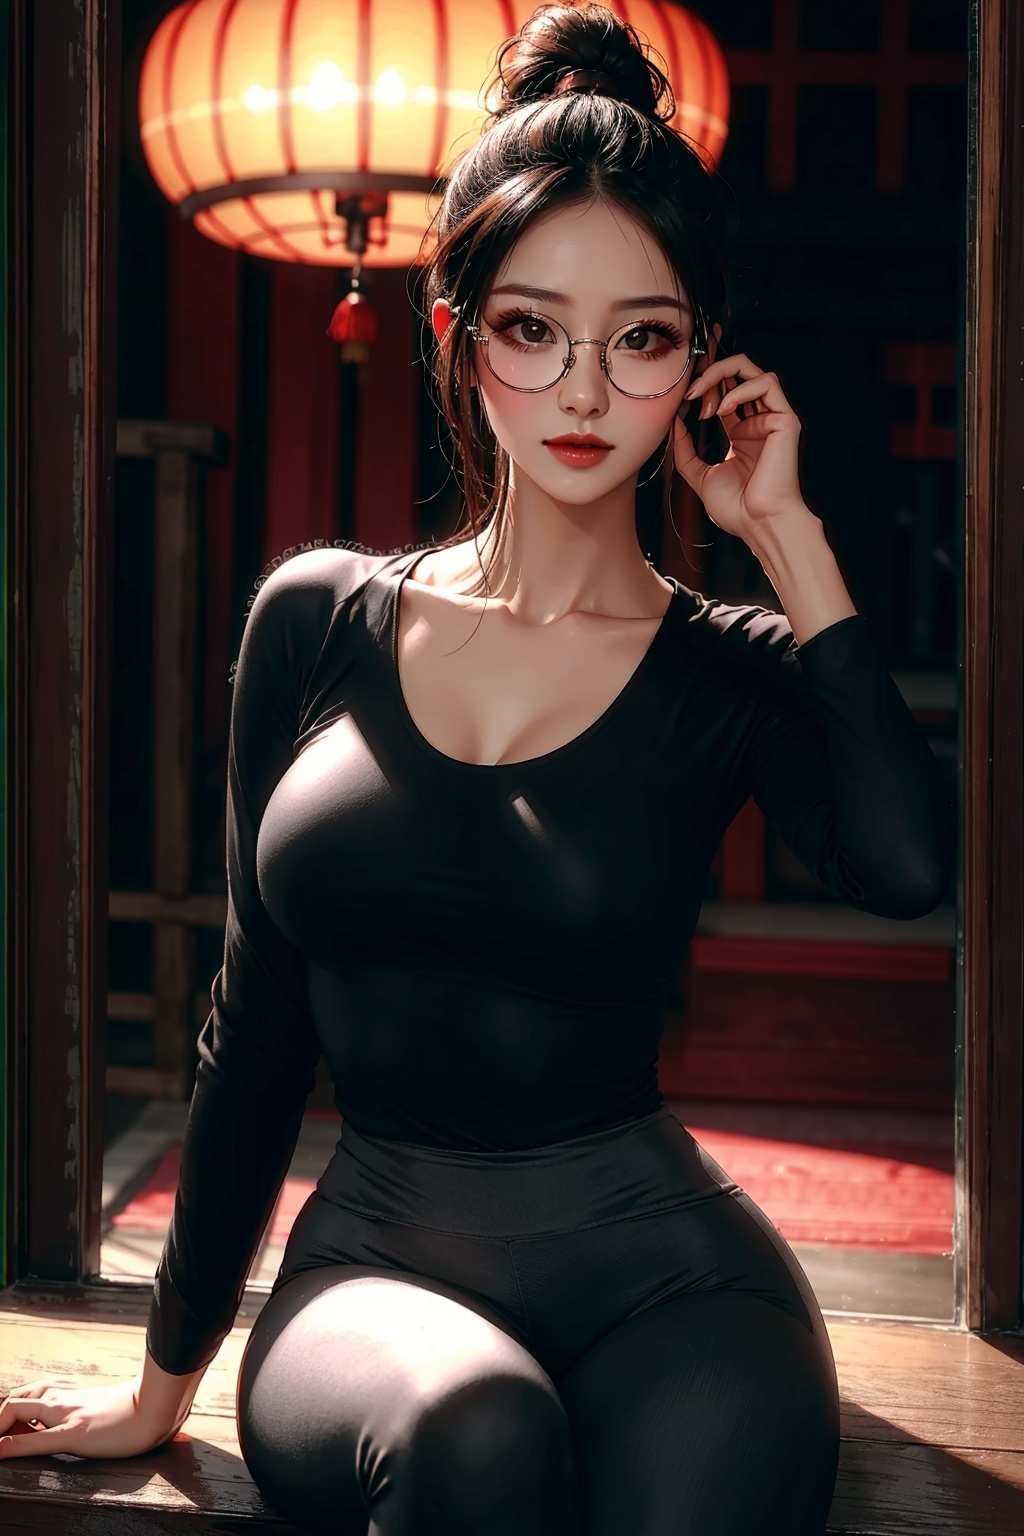  frameless glasses eyewear,chinese clothes ,yoga pants,High-quality photography- Master's work- Detailed face description- Cute girl- Sexy pose- Fashionable woman- Confident expression- Photography- Center of focus is fashion.,in the dark,deep shadow,